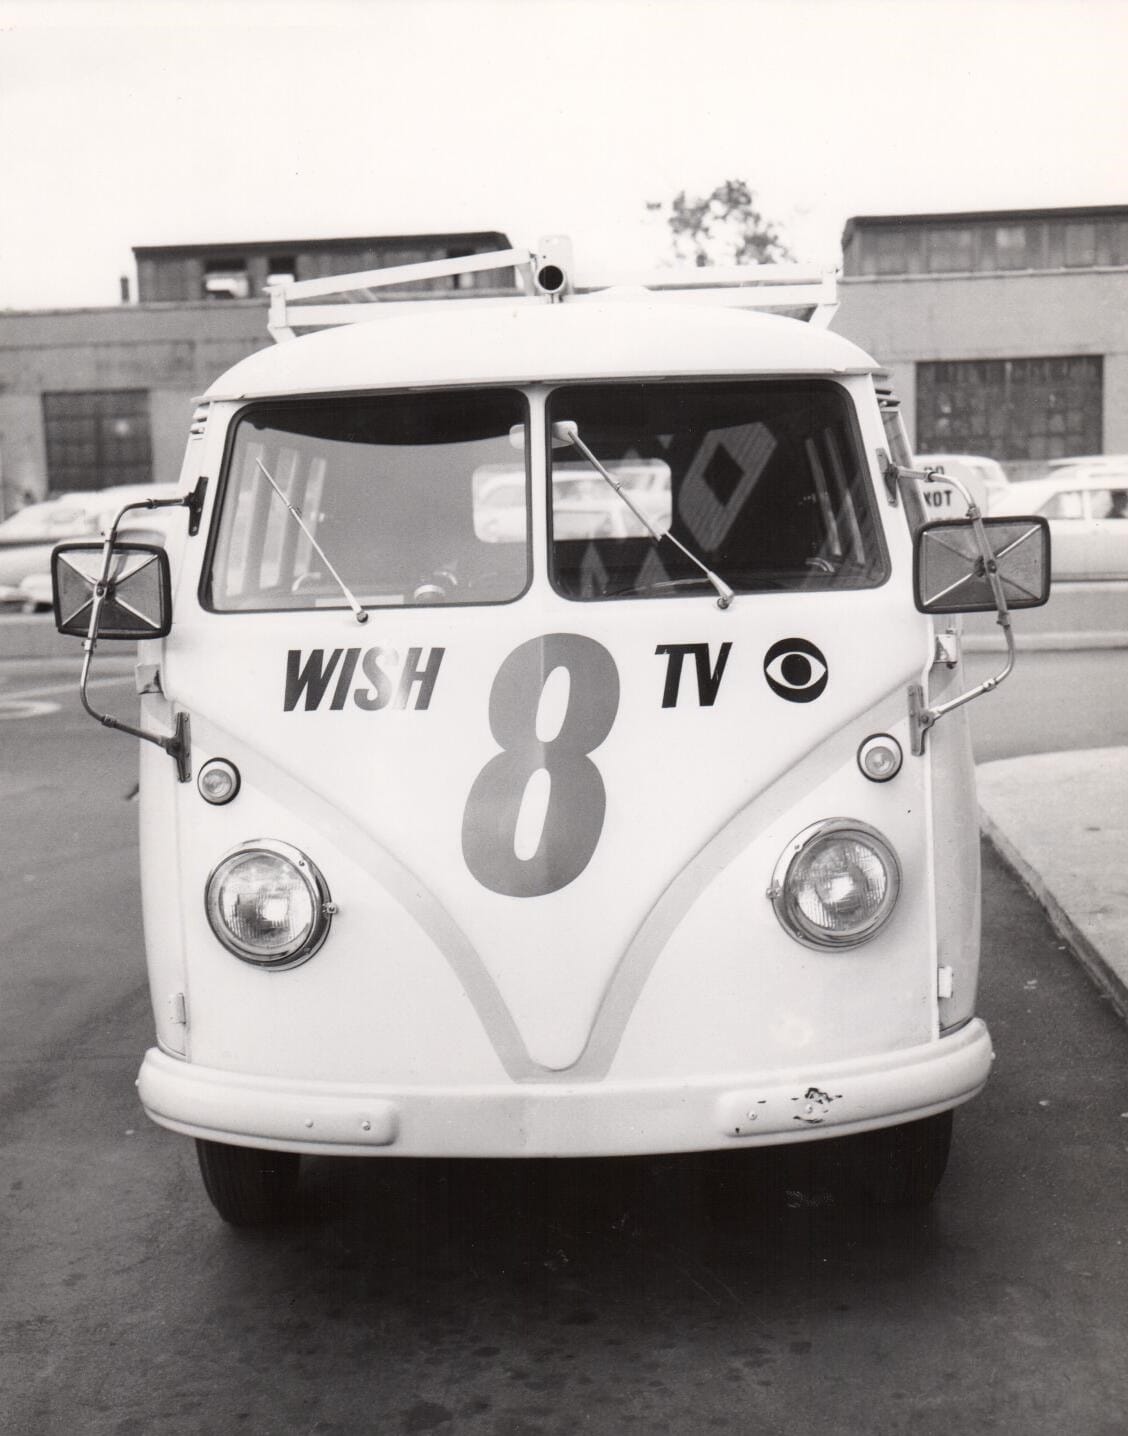 A Volkswagen bus used in the 1960's.